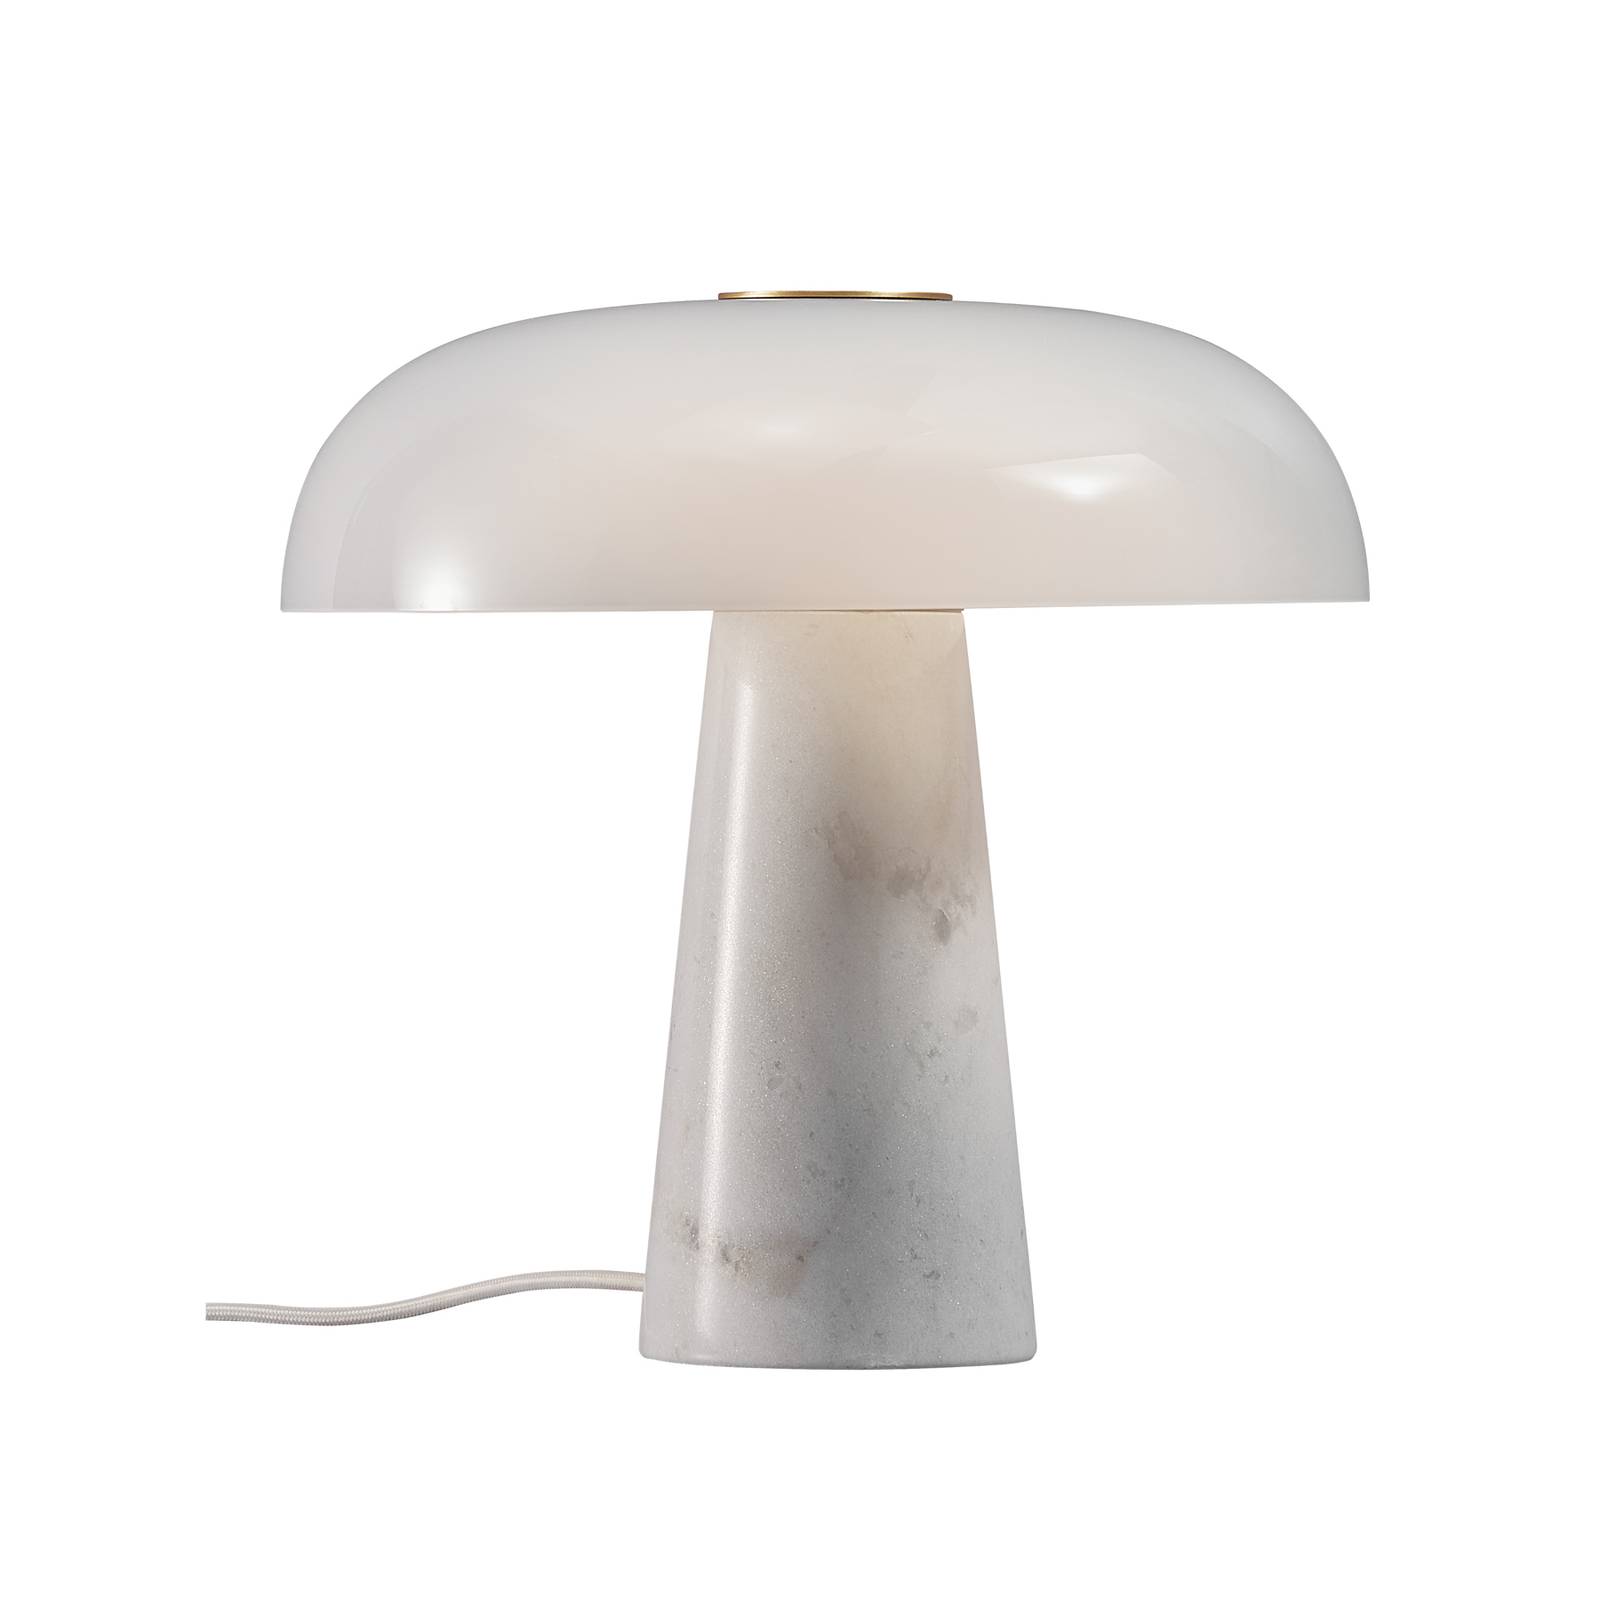 Image of Lampe à poser Glossy, blanche/blanc opale 5704924001024